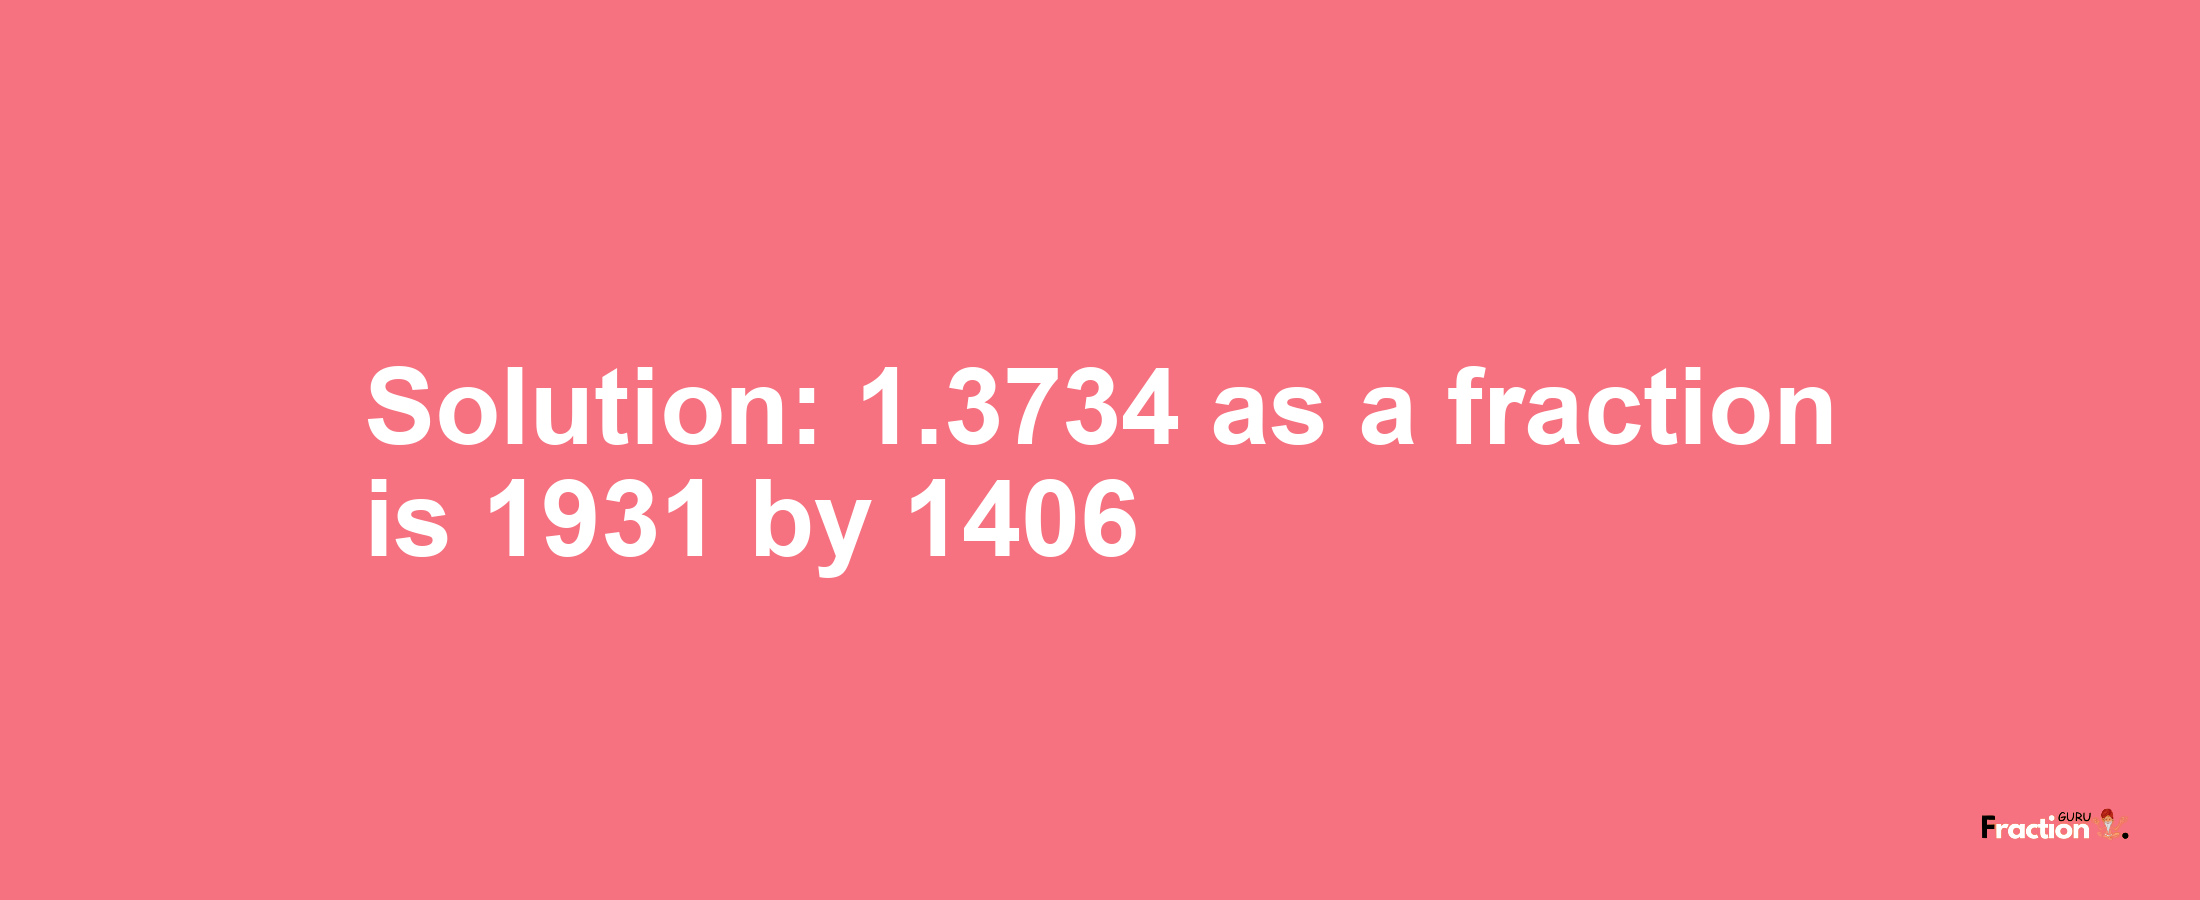 Solution:1.3734 as a fraction is 1931/1406